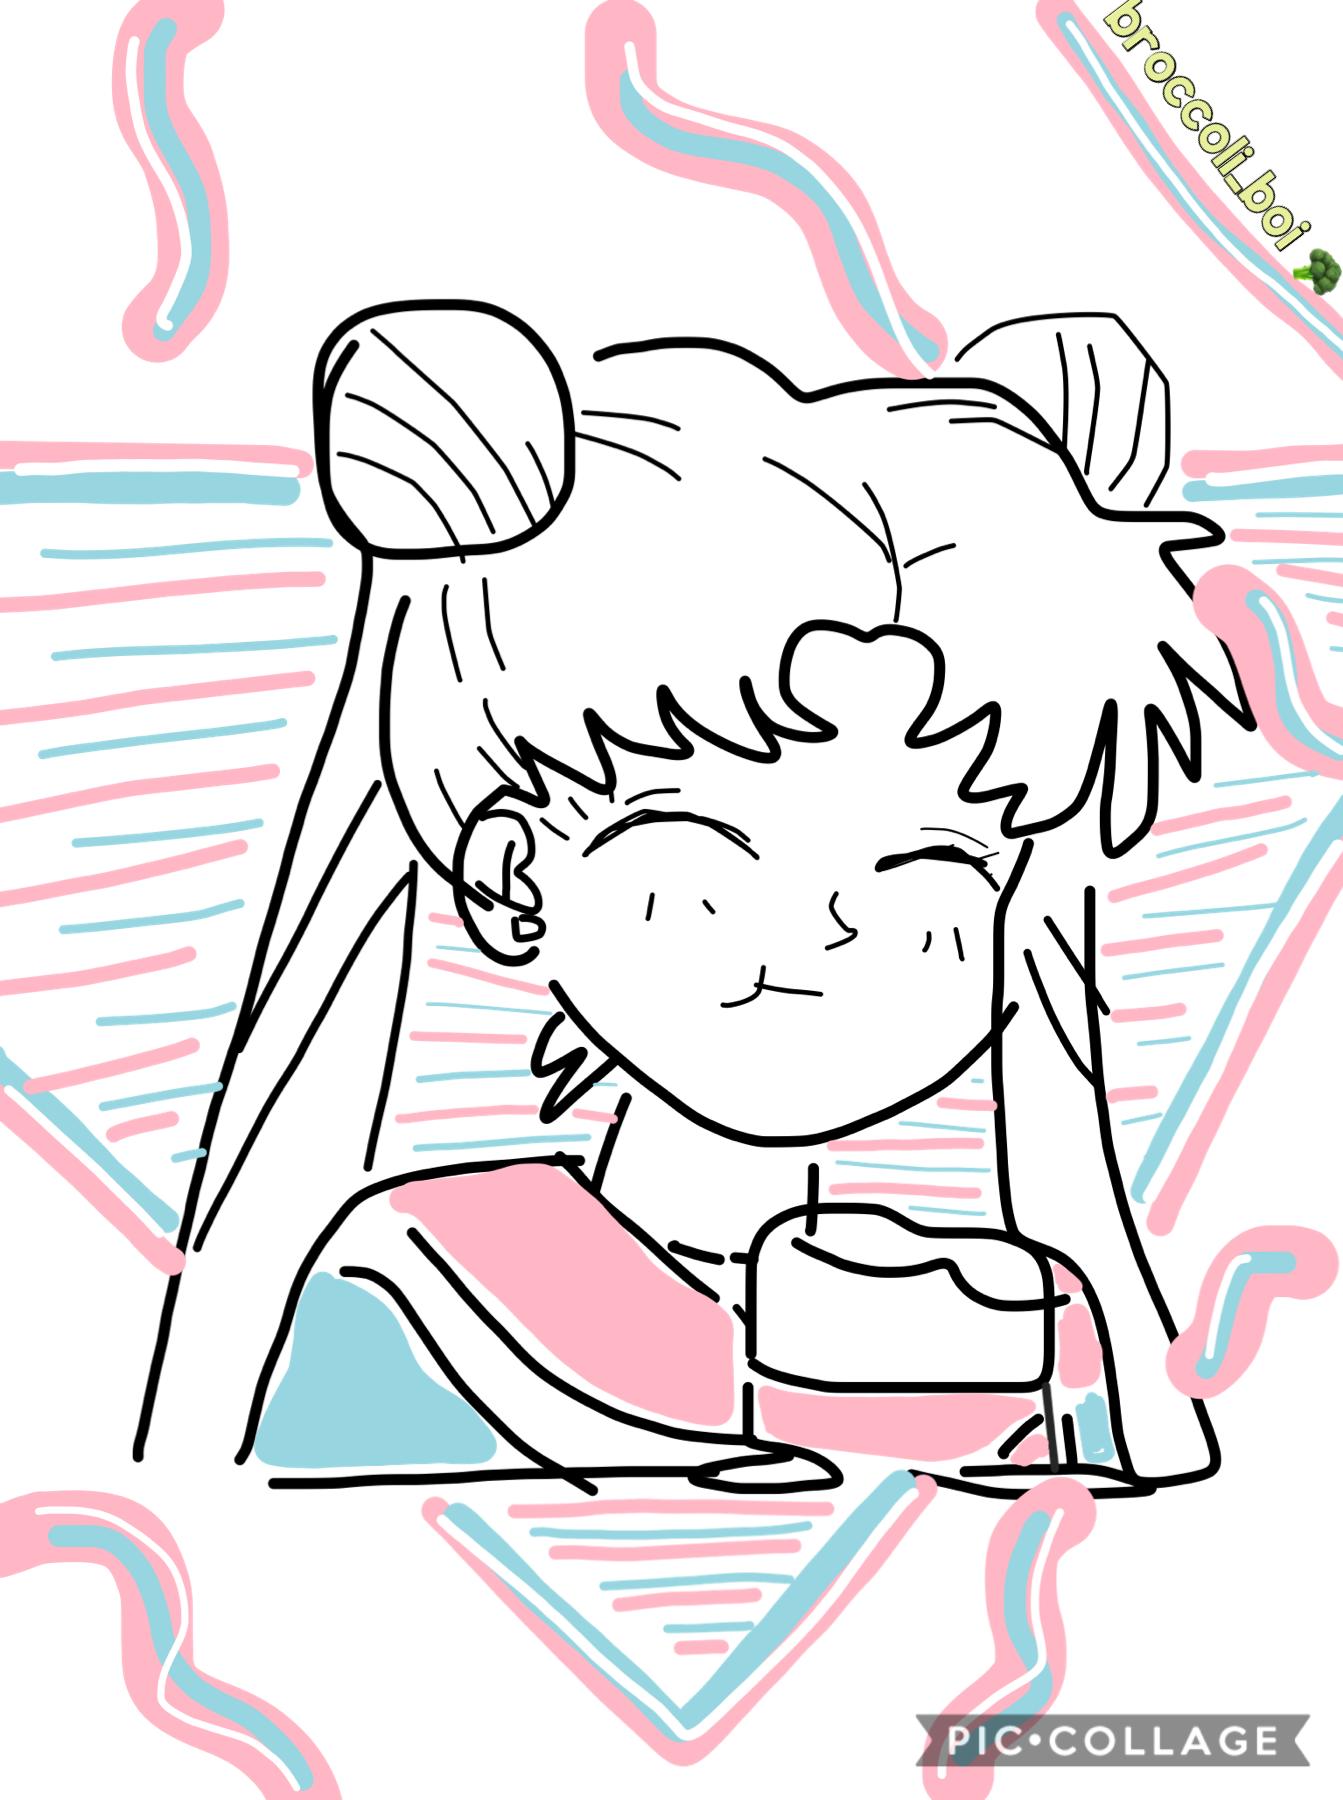 Tap
Last repost
dis one is a sailor moon drawing I did here on pc